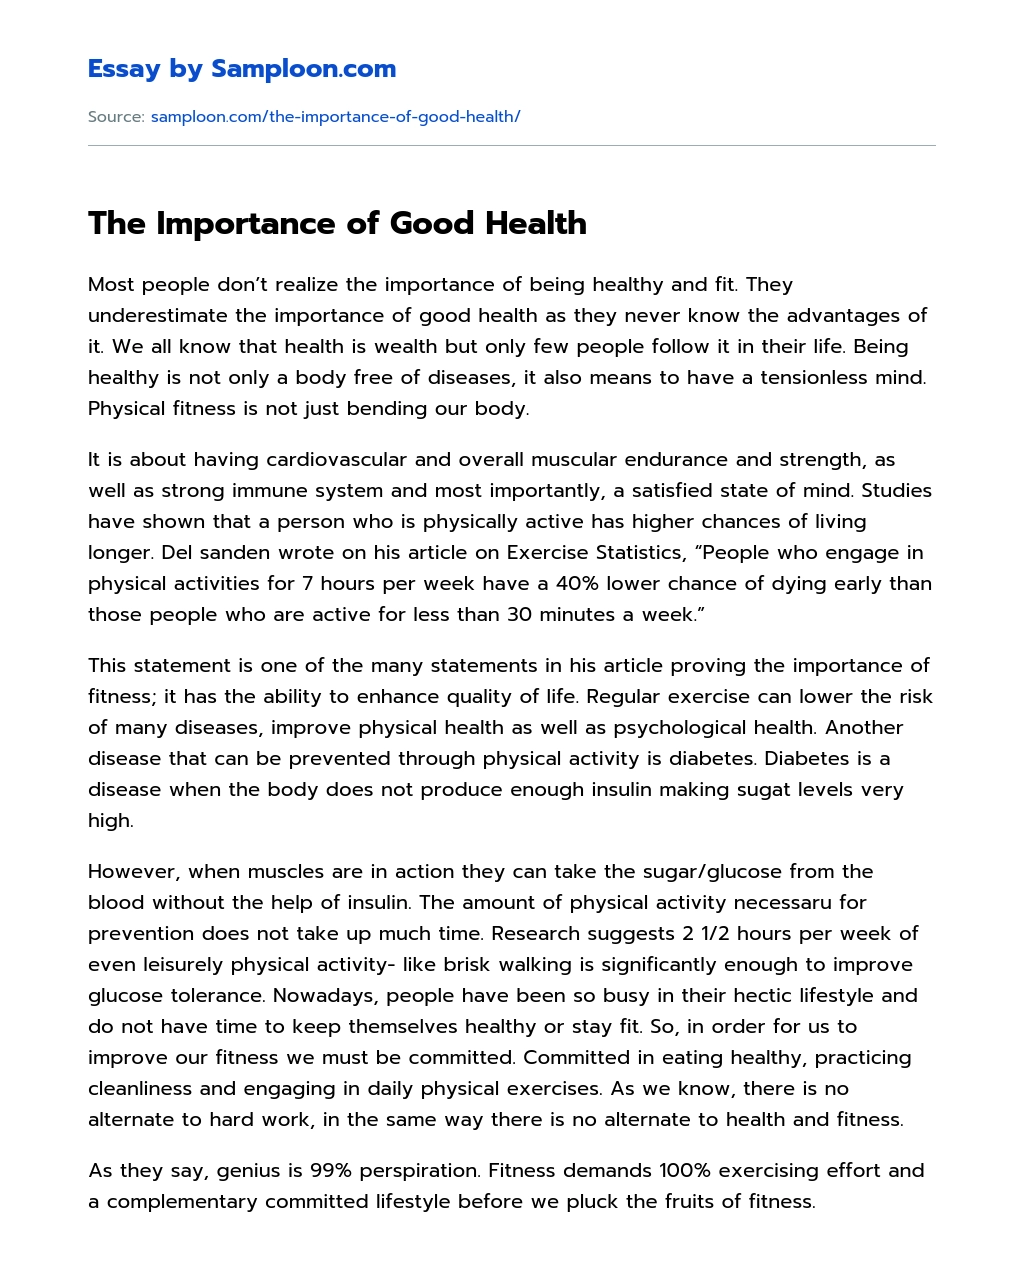 The Importance of Good Health essay